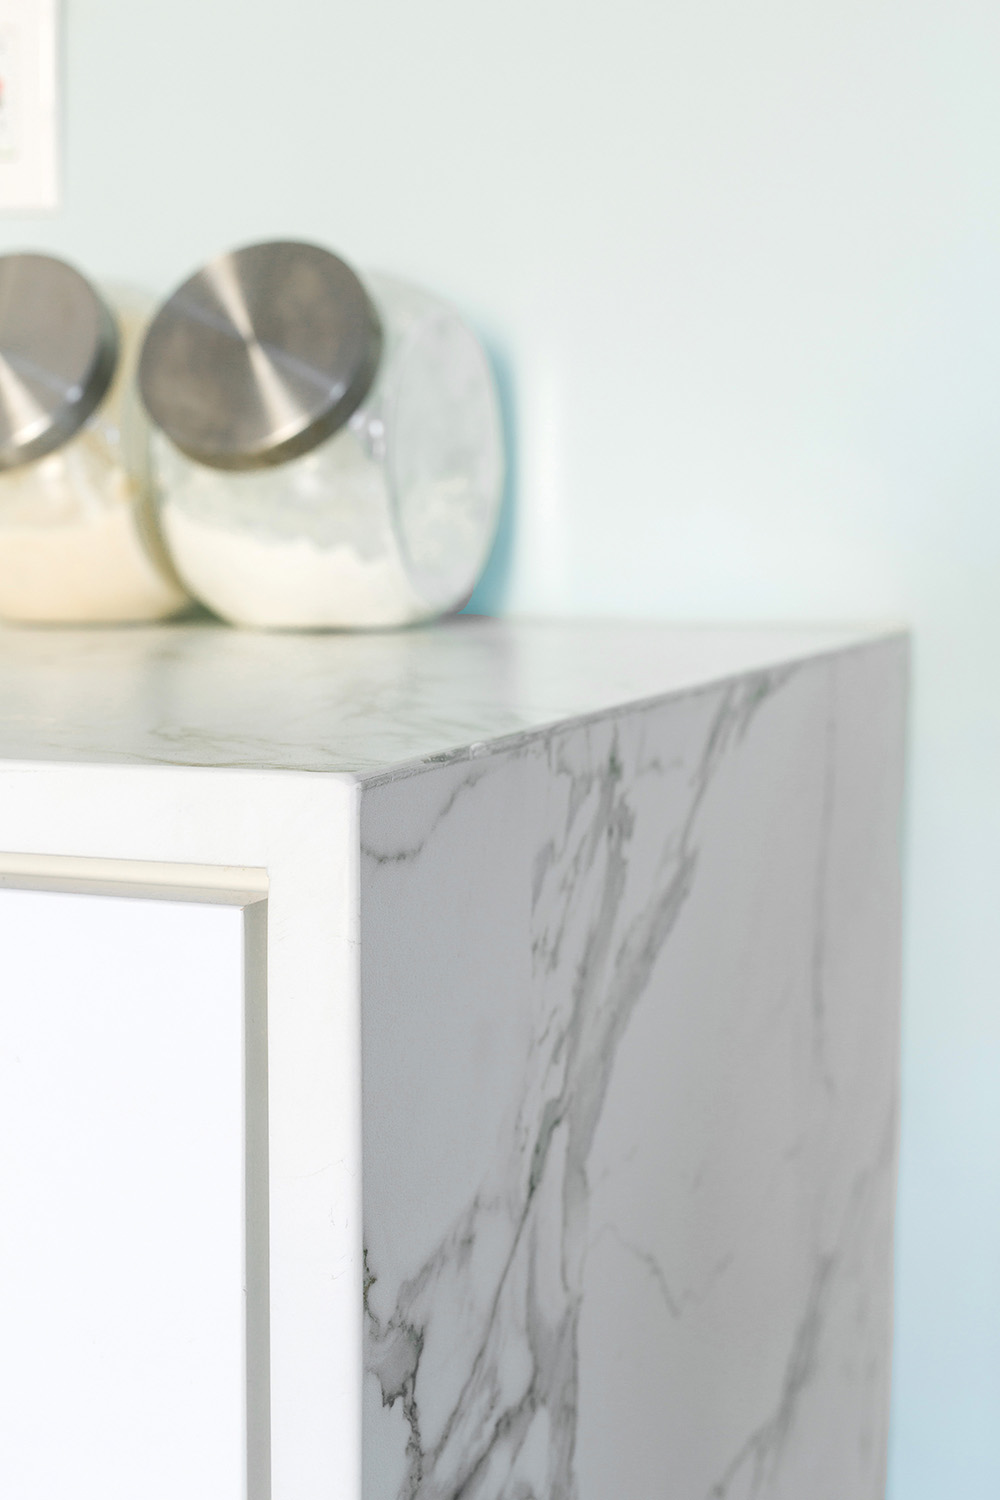 A marble counter top with glass containers.